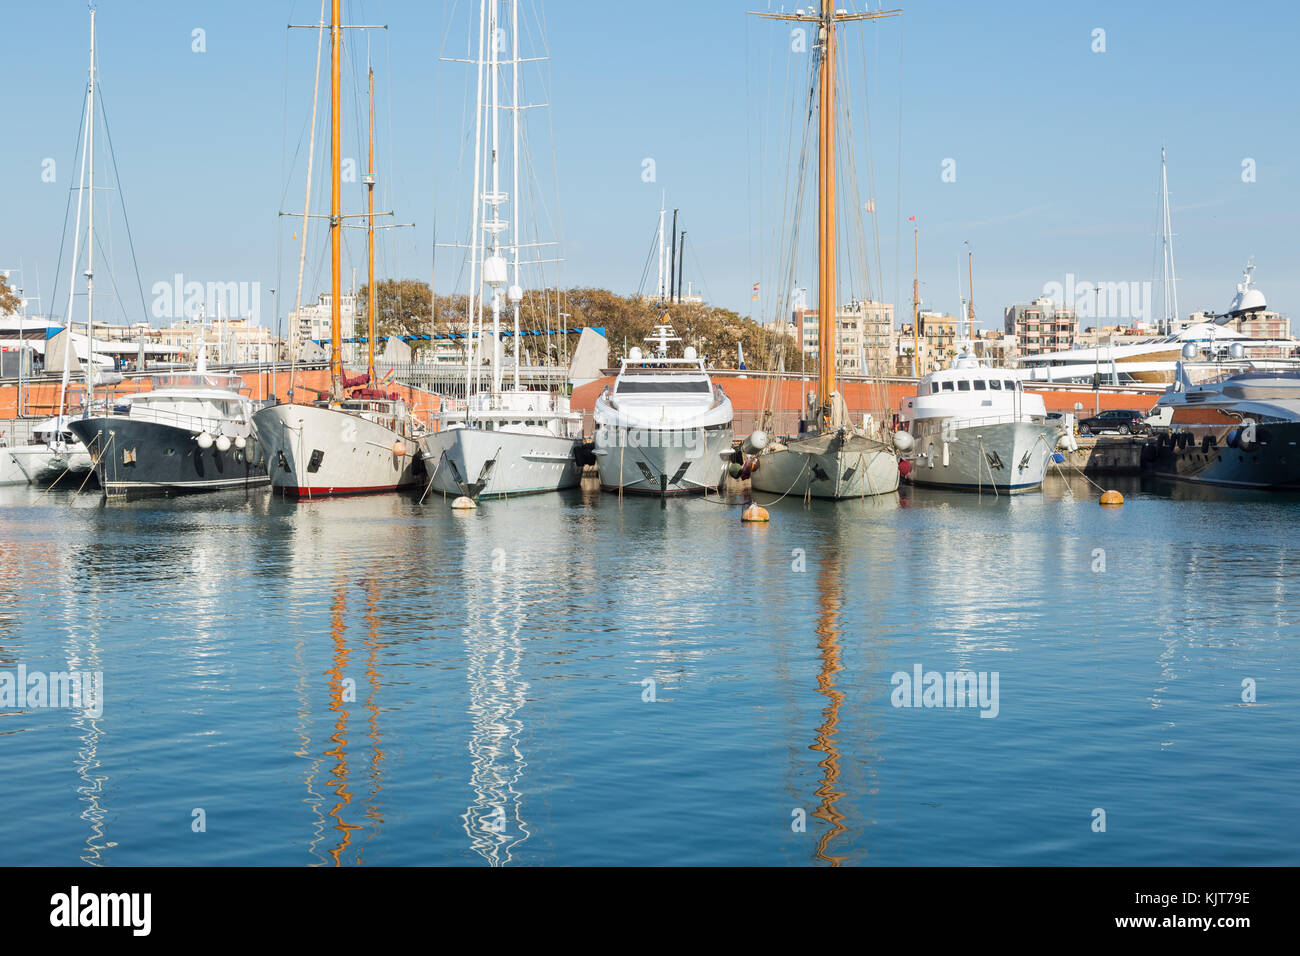 Boats and vessels at anchor in the port of Barcelona, Spain Stock Photo